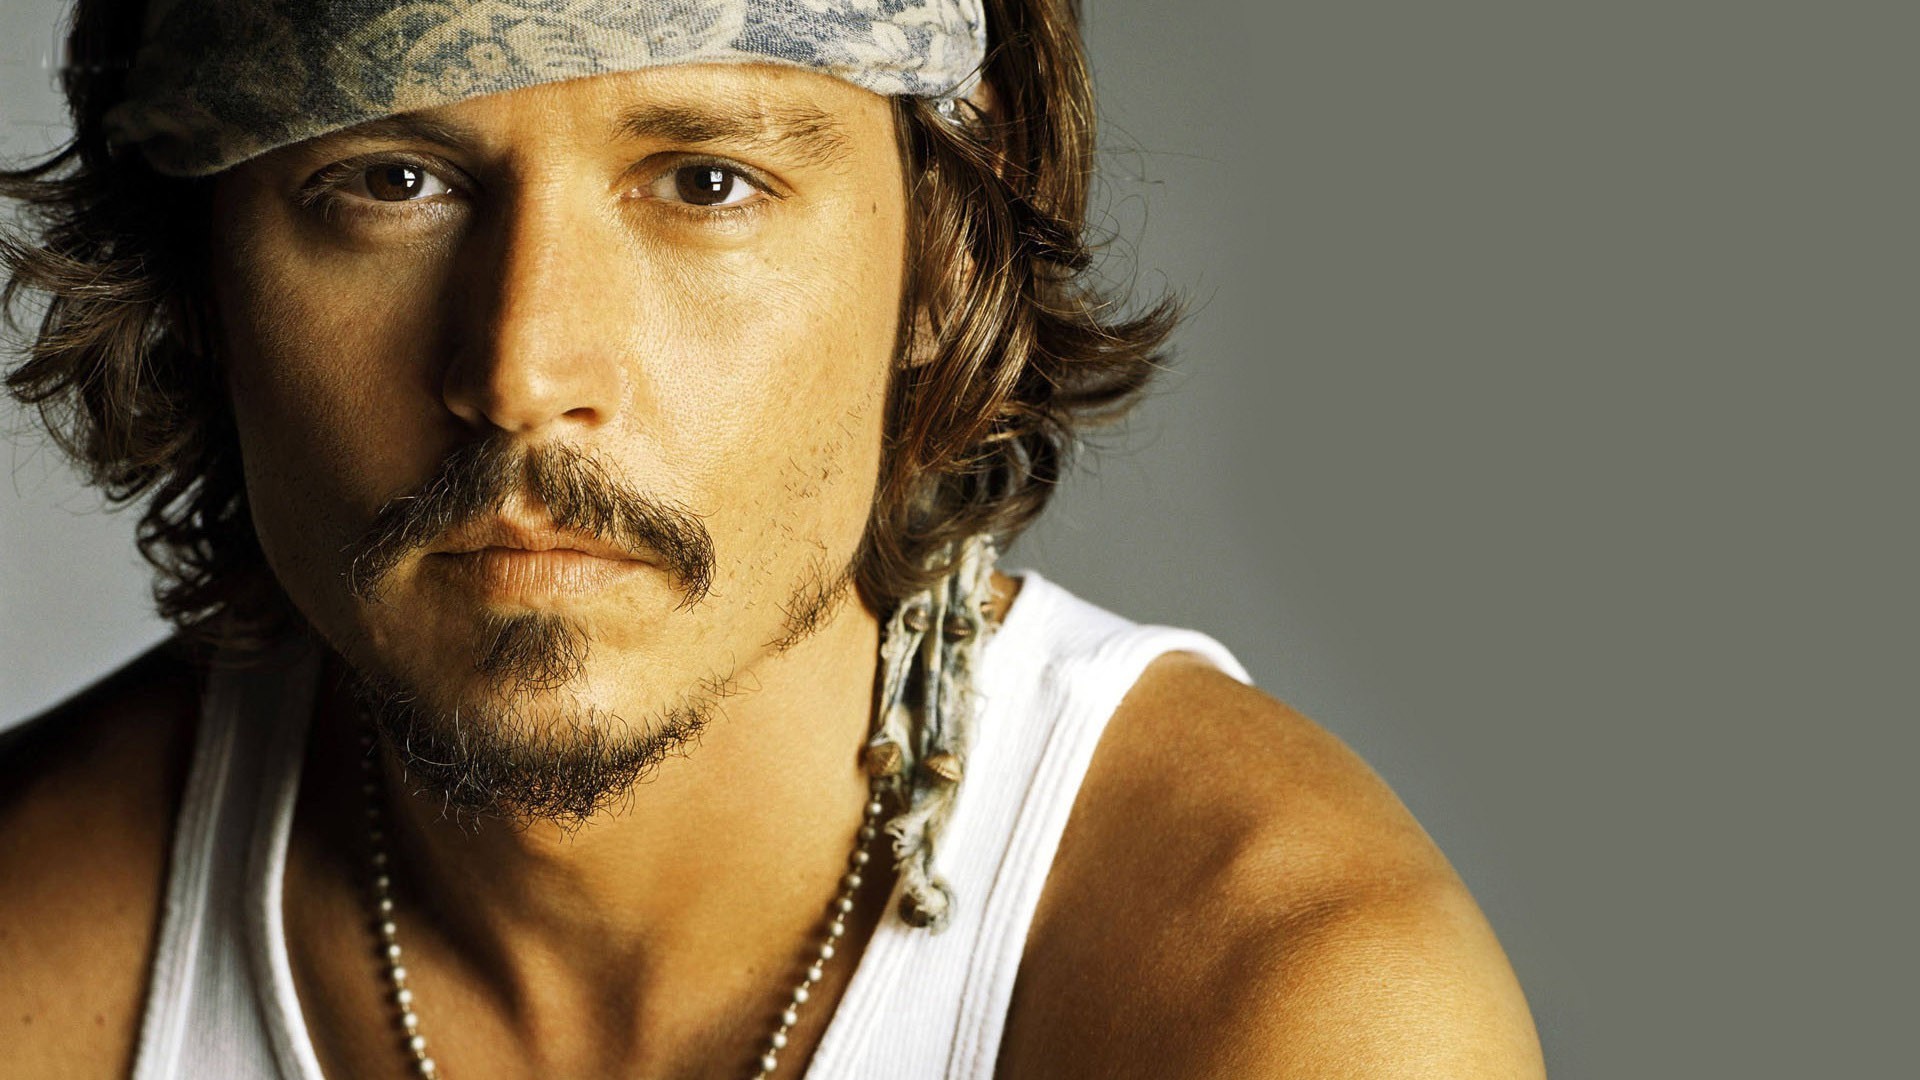 Johnny Depp HD Wallpapers - Wallpaper, High Definition, High Quality